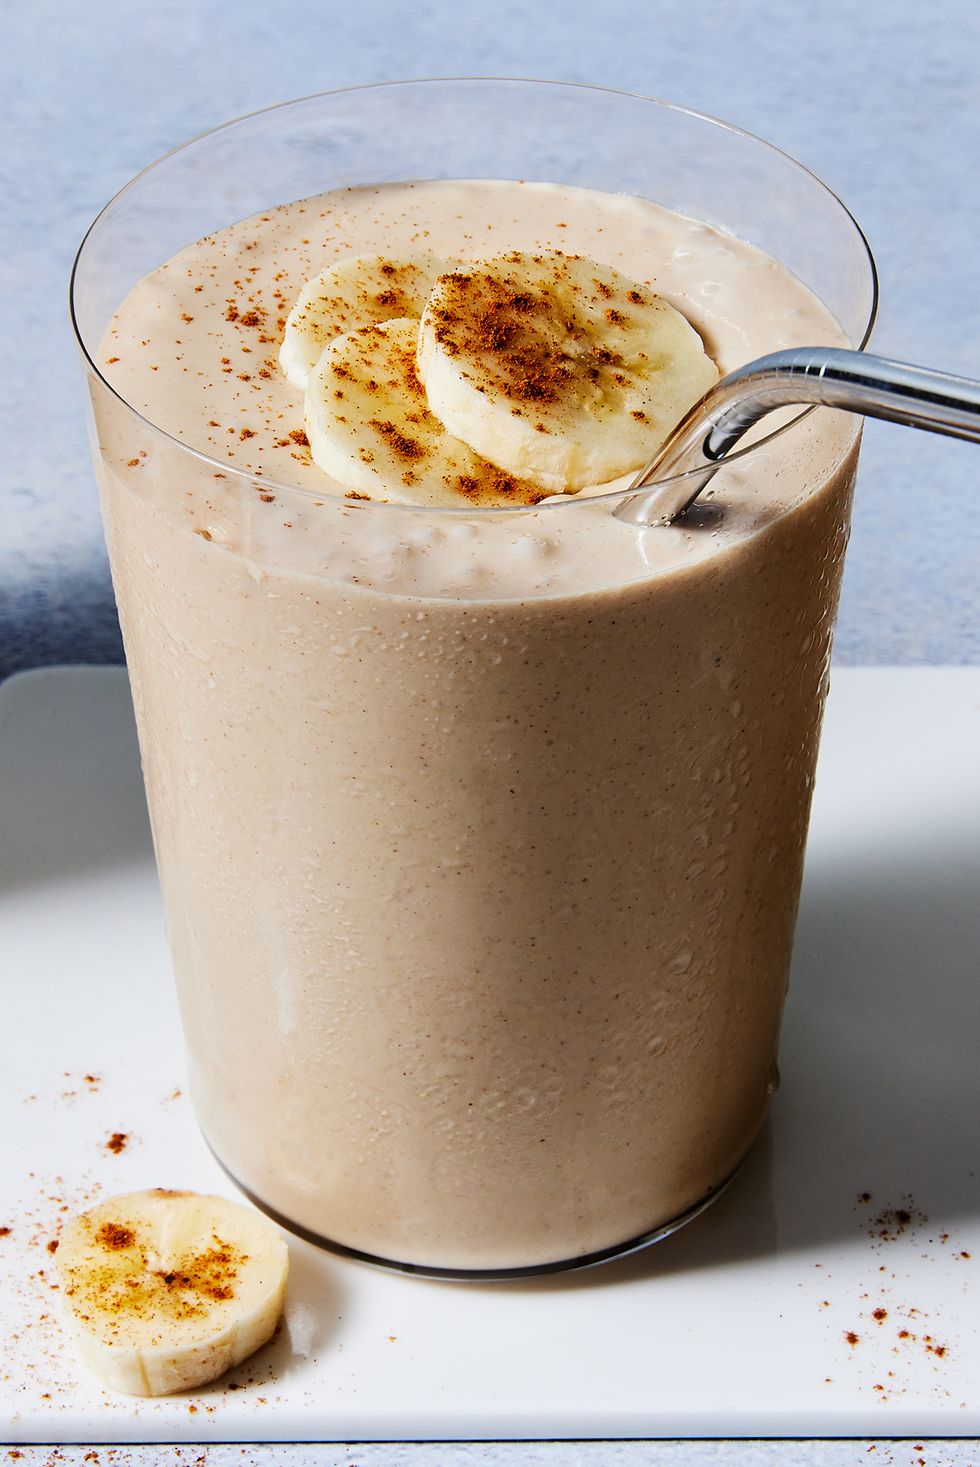 peanut butter banana smoothie with banana slices and cinnamon on top